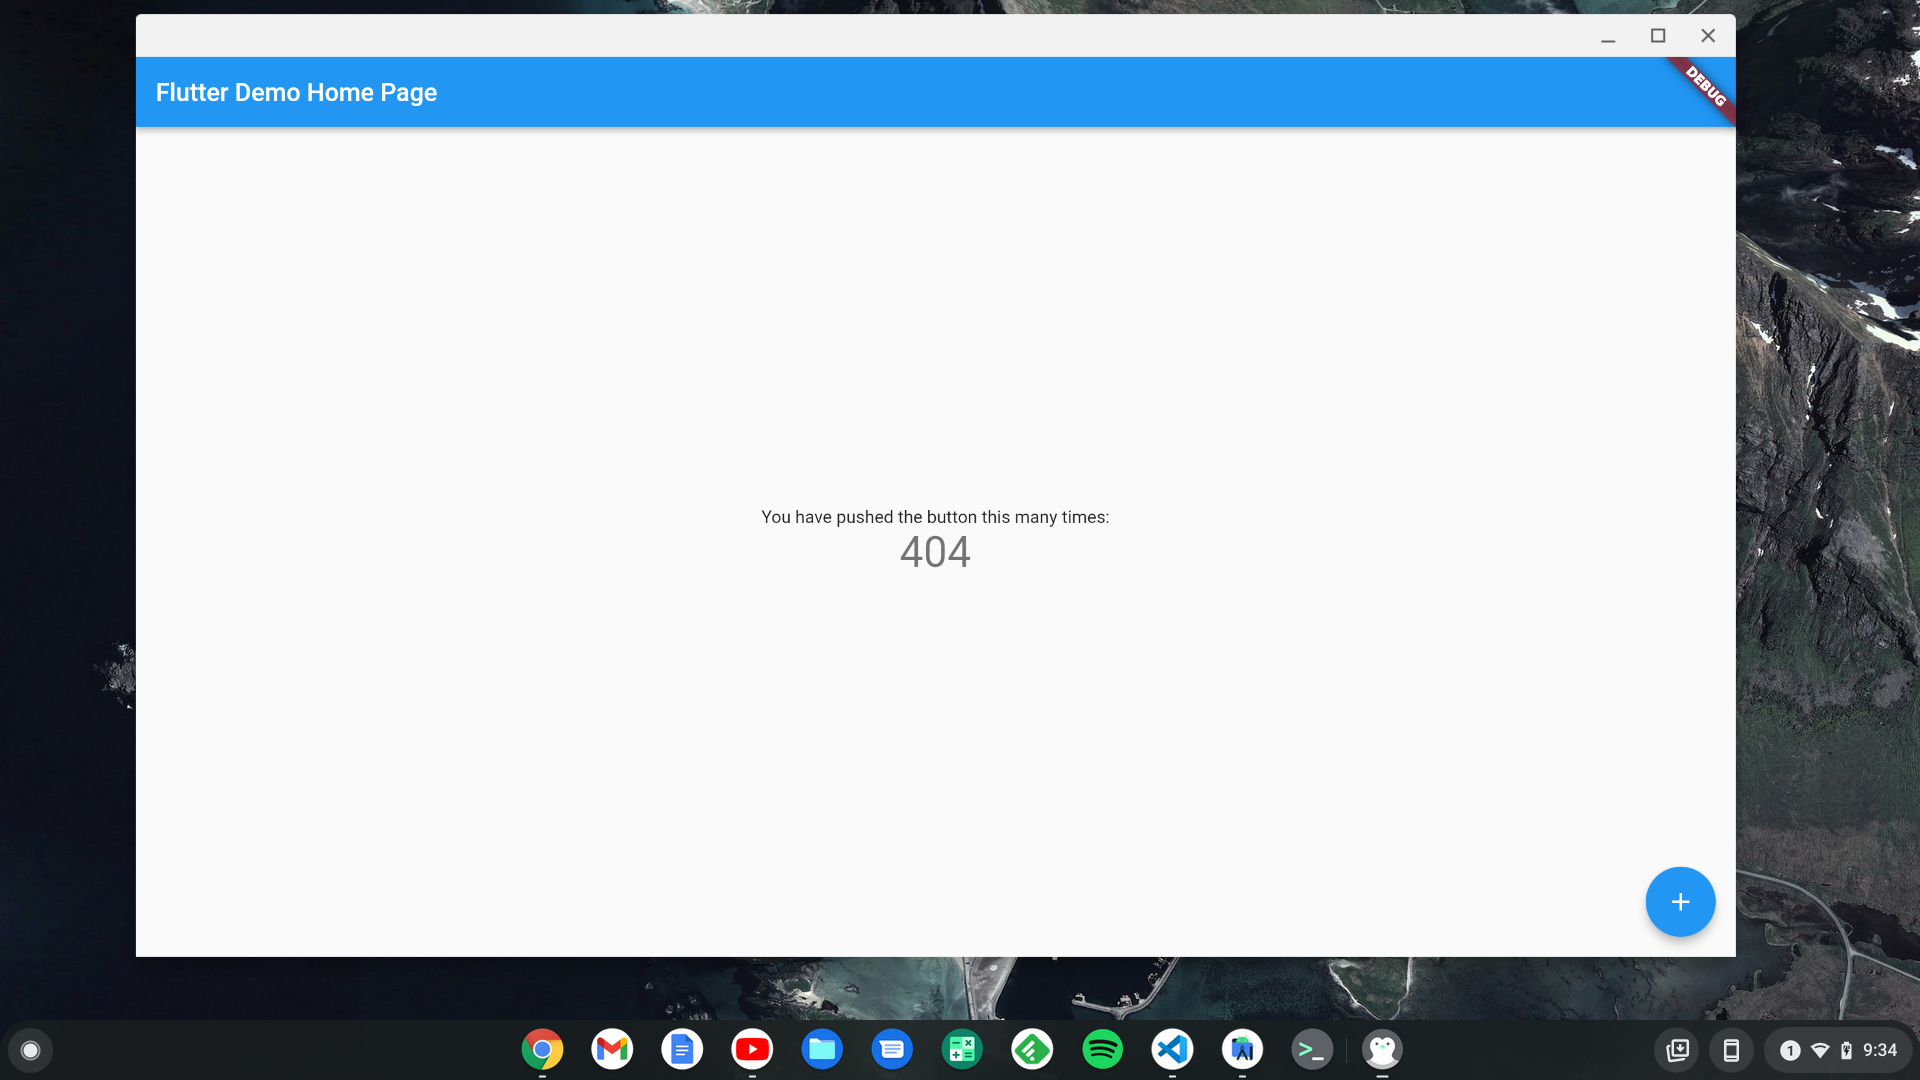 Learn from my Mistakes - Trying Flutter Development on Chrome OS